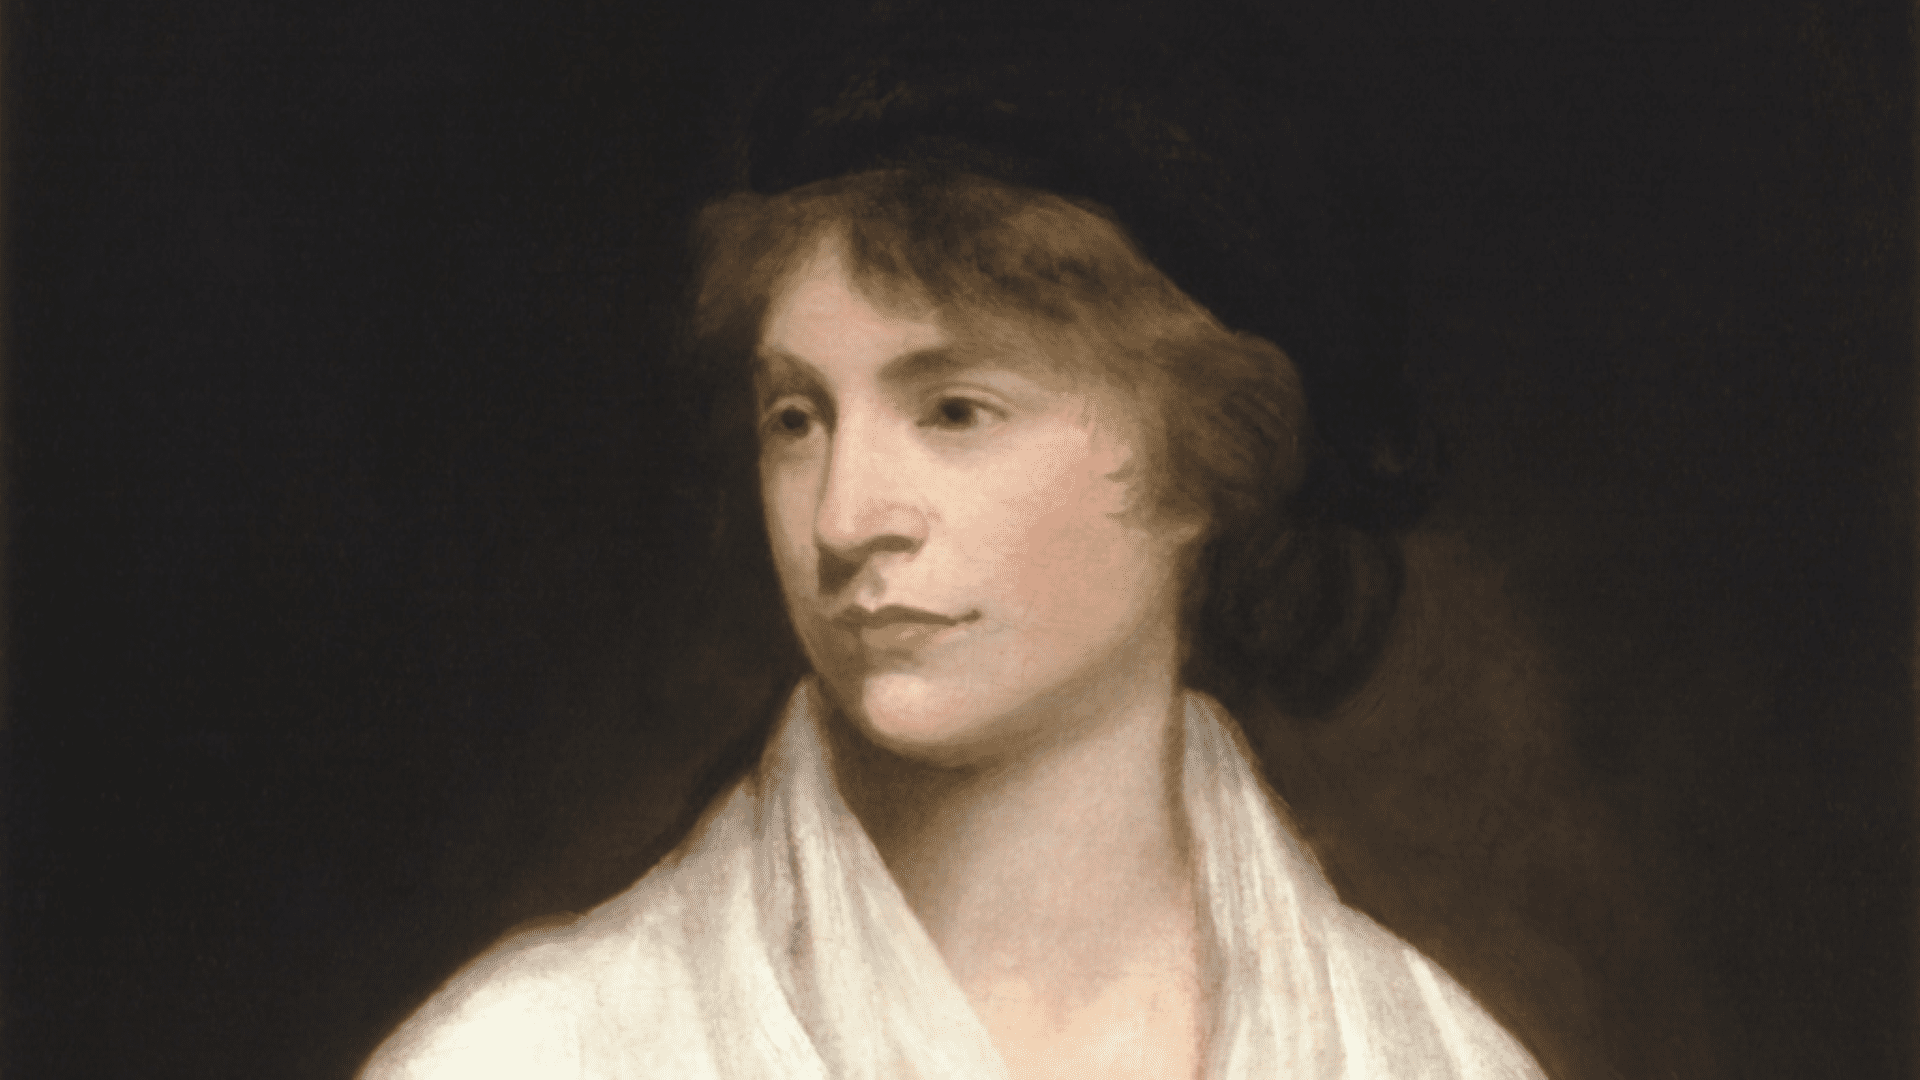 In 1792, Mary Wollstonecraft wrote A Vindication of the Rights of Woman, wherein she established the individualist roots of equal rights.